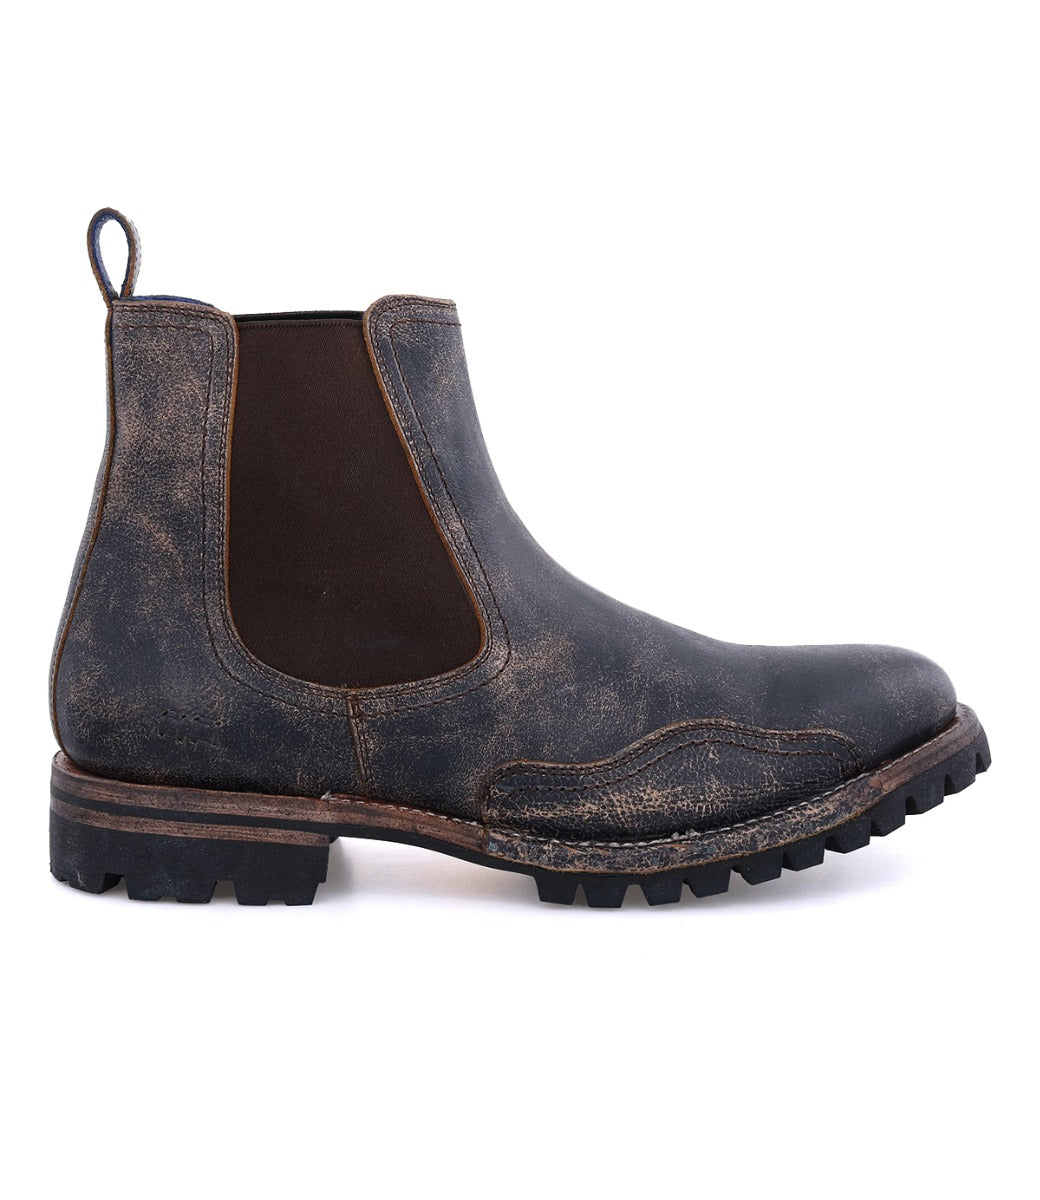 Side view of a distressed leather Bed Stu Brady Trek Chelsea boot with elastic side panels and a Vibram outsole, isolated on a white background.